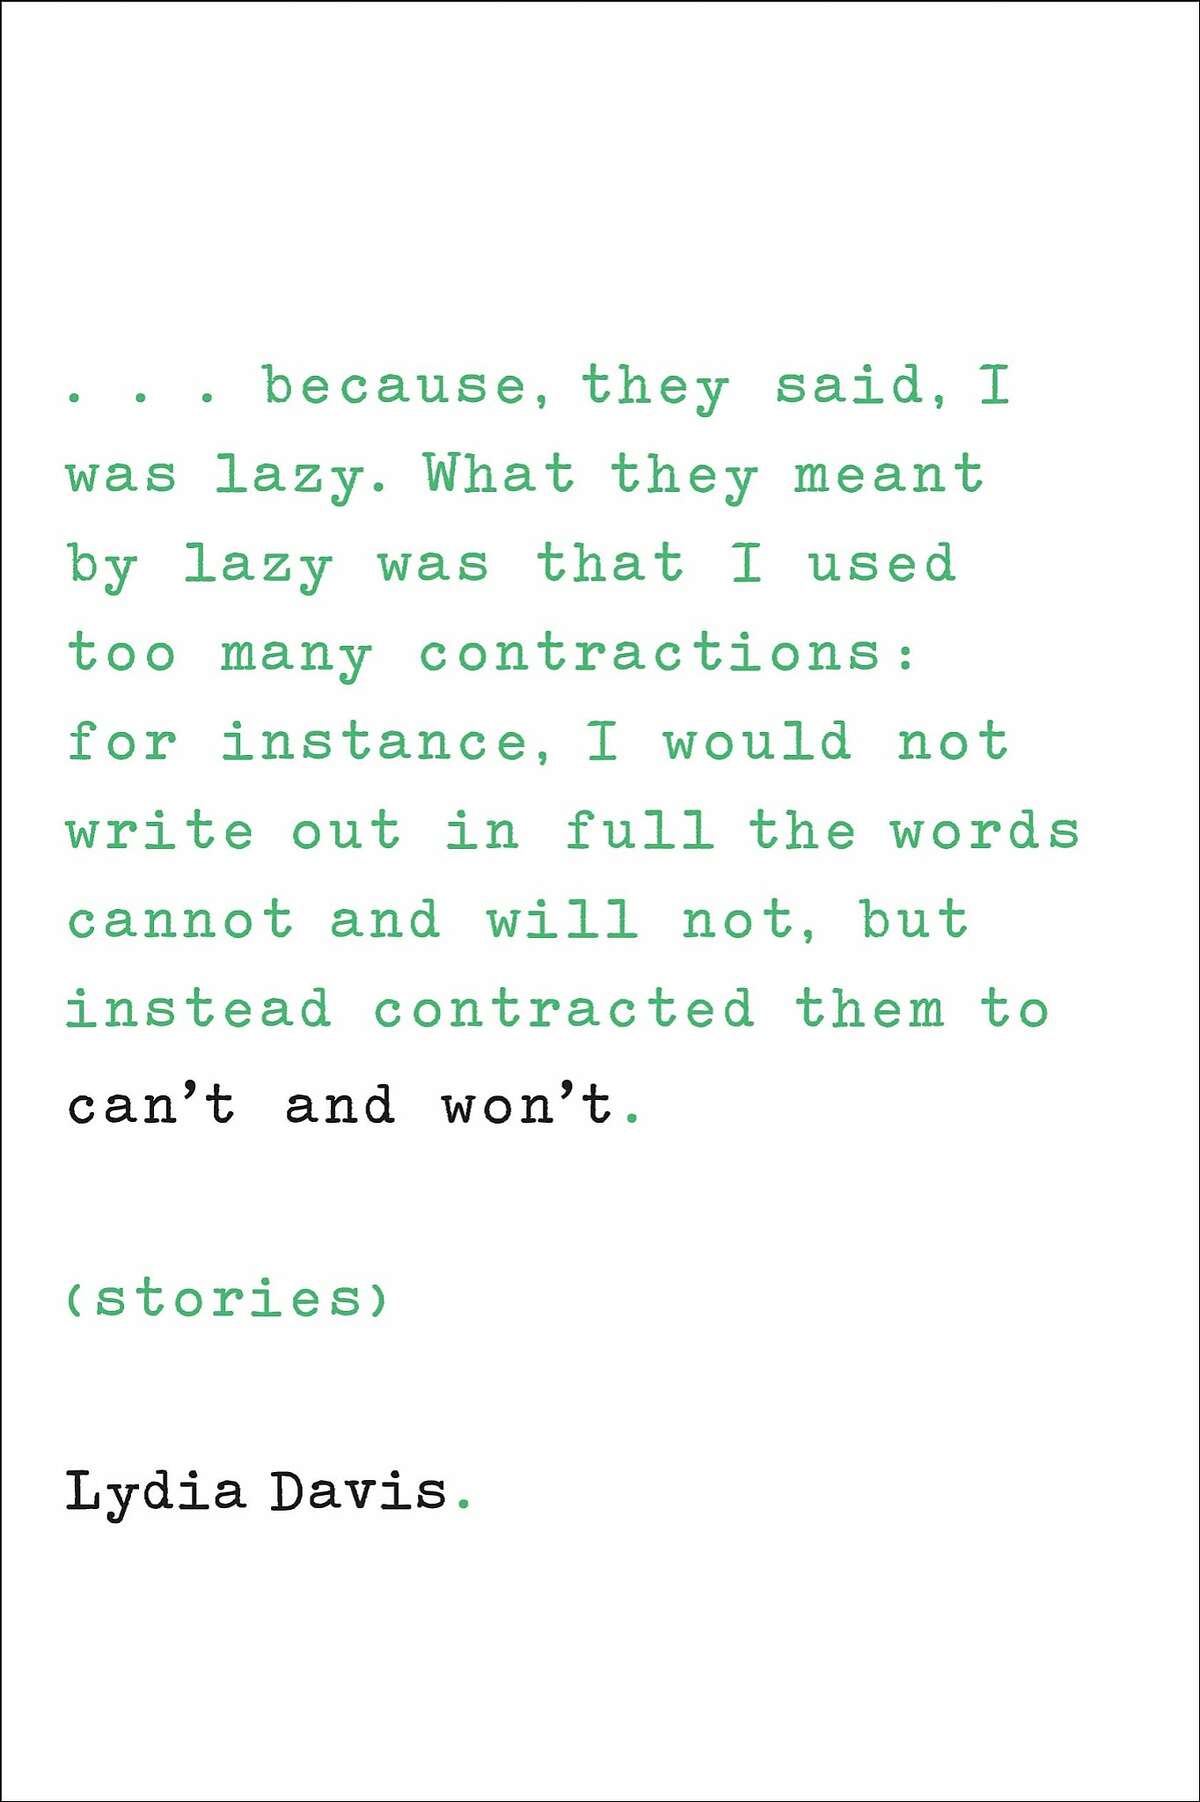 "Can't and Won't," stories by Lydia Davis